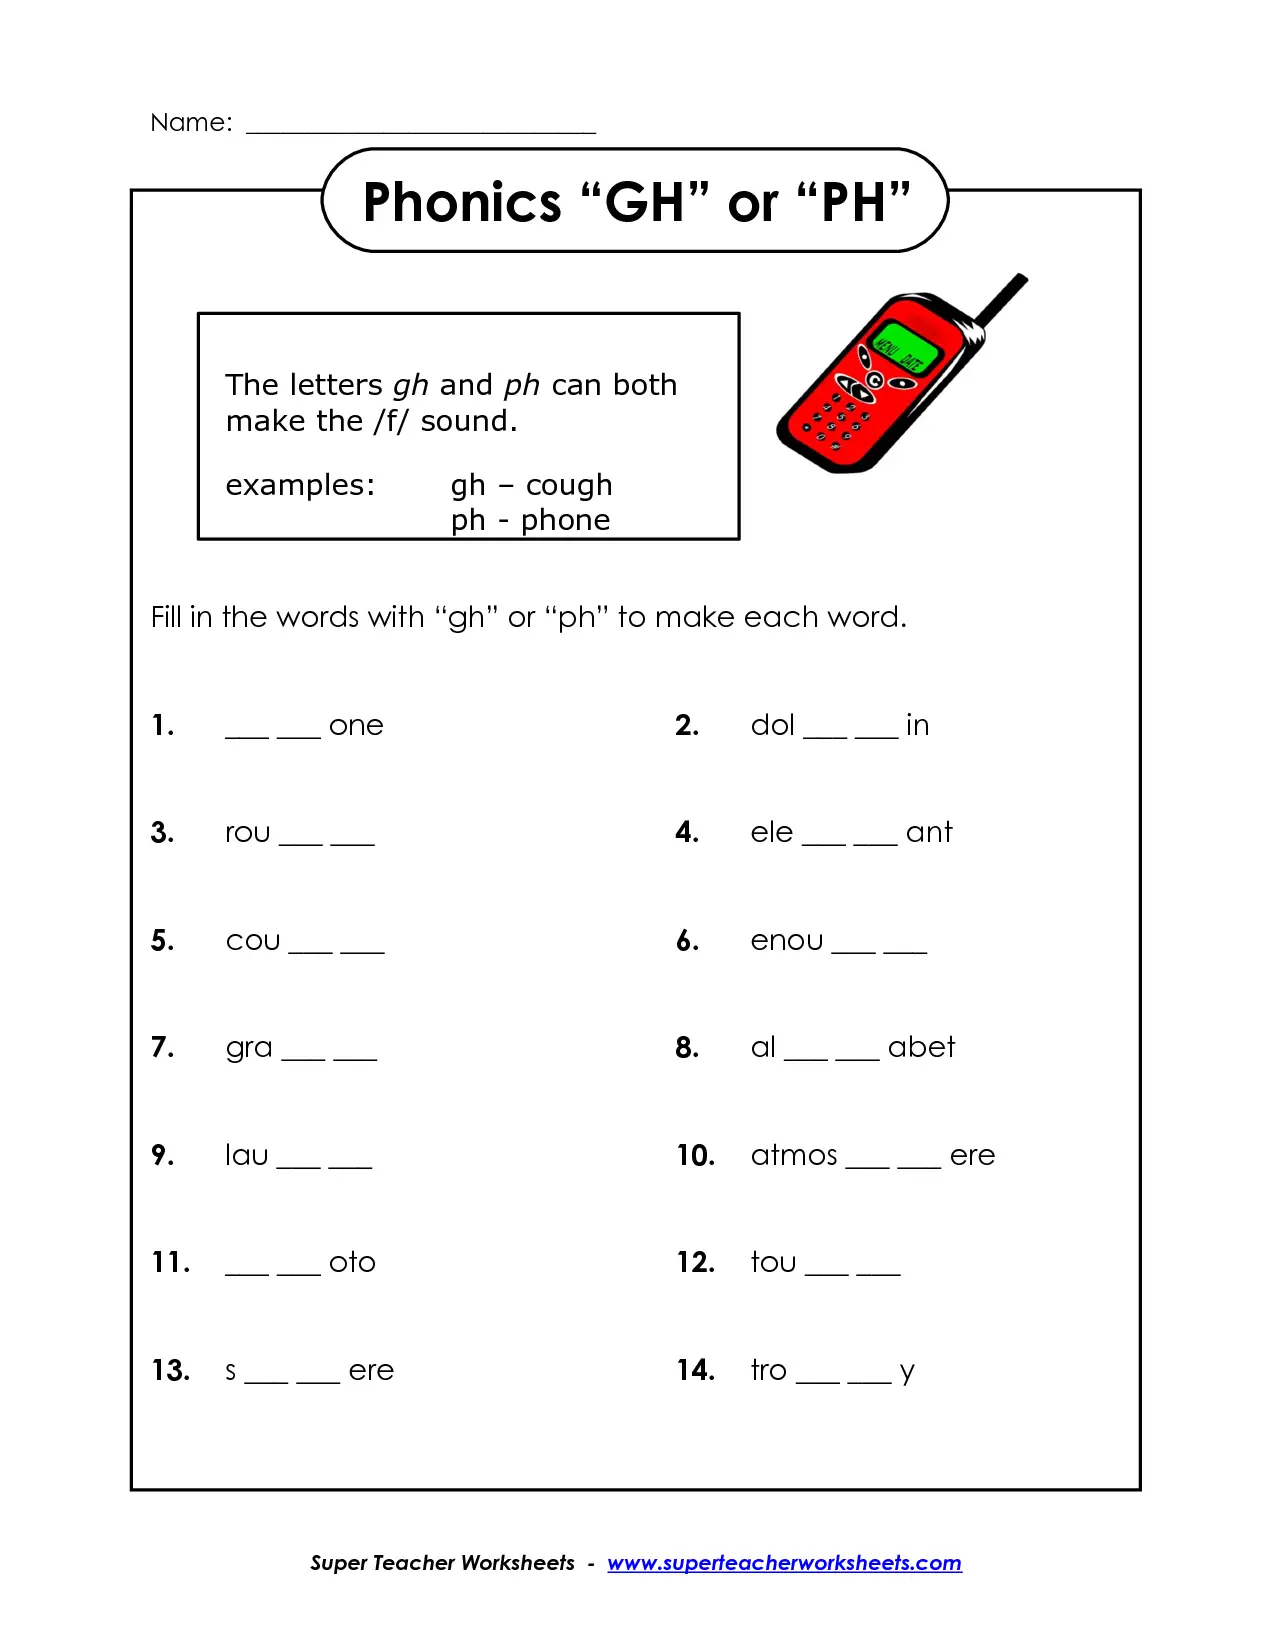 first-english-for-all-children-learn-english-phonics-worksheets-english-phonics-phonics